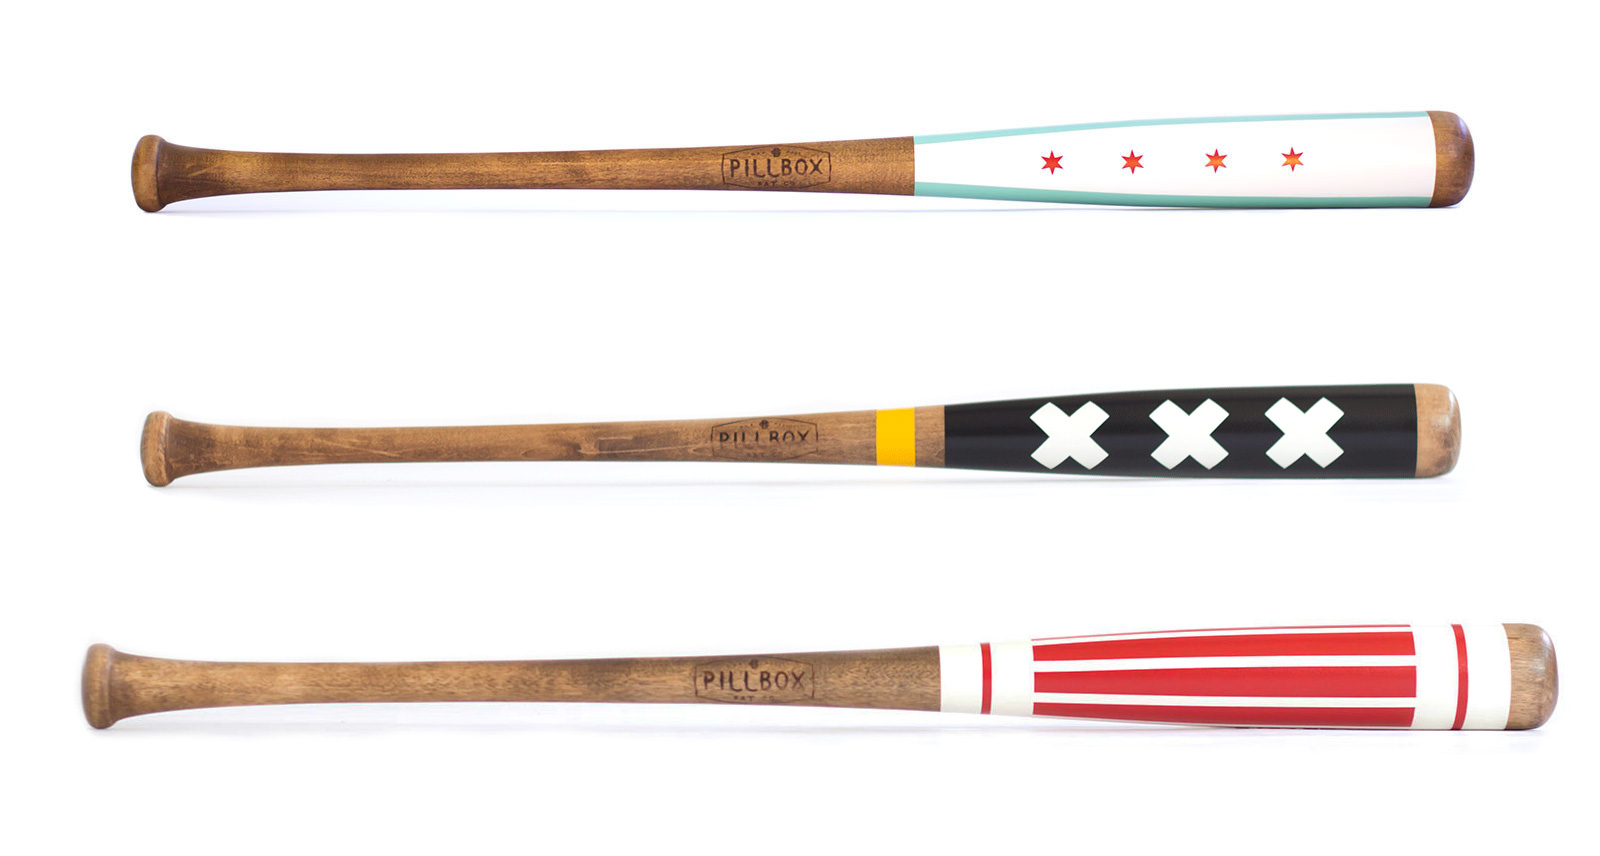 These Hand-Painted Bats Will as Good on Your Wall as They Do on the Field - Sharp Magazine